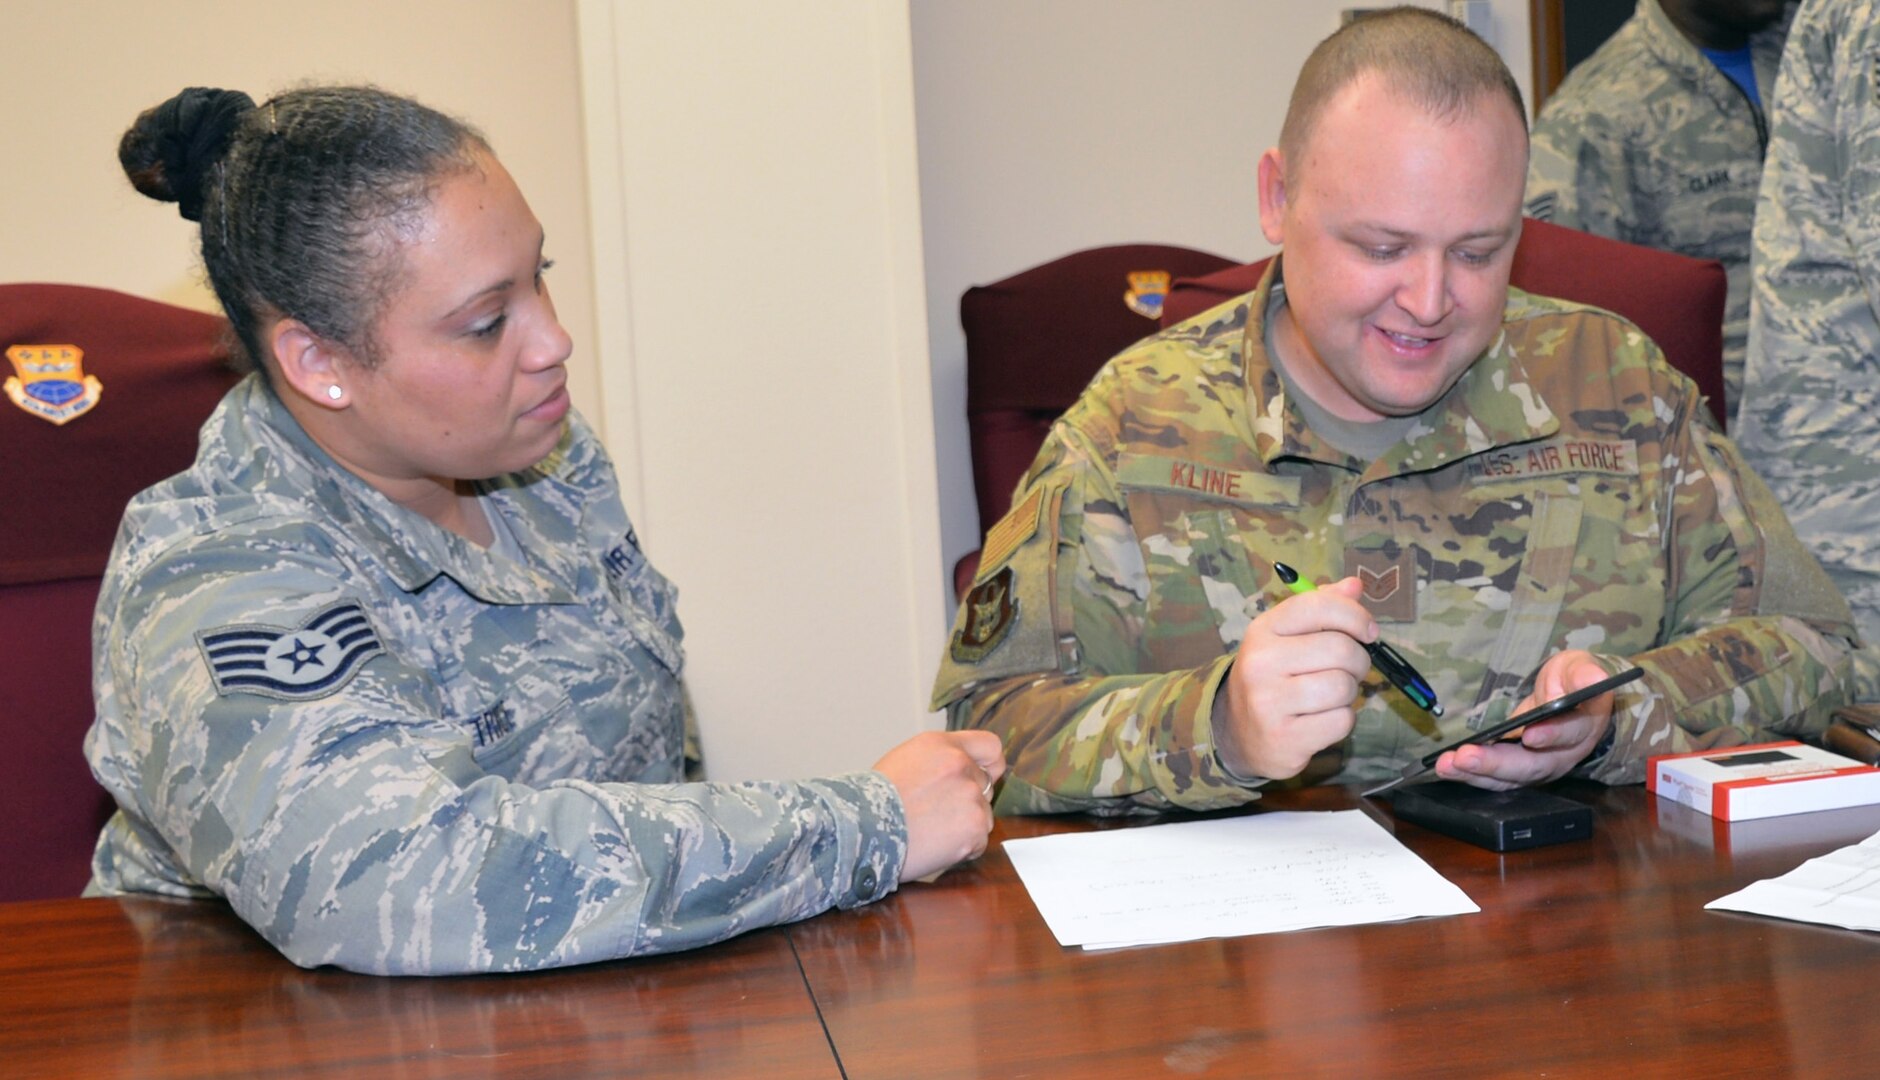 Staff Sgt. Luz Trice, 433rd Mission Support Group command support staff, guides Staff Sgt. Daryn Kline, 433rd Aircraft Maintenance Squadron avionics specialist, through the process of submitting a travel voucher by using the new mobile common access card enabled Air Force Connect app at Joint Base San Antonio-Lackland April 7. The 433rd Airlift Wing is one of two beta testing locations for this new capability.